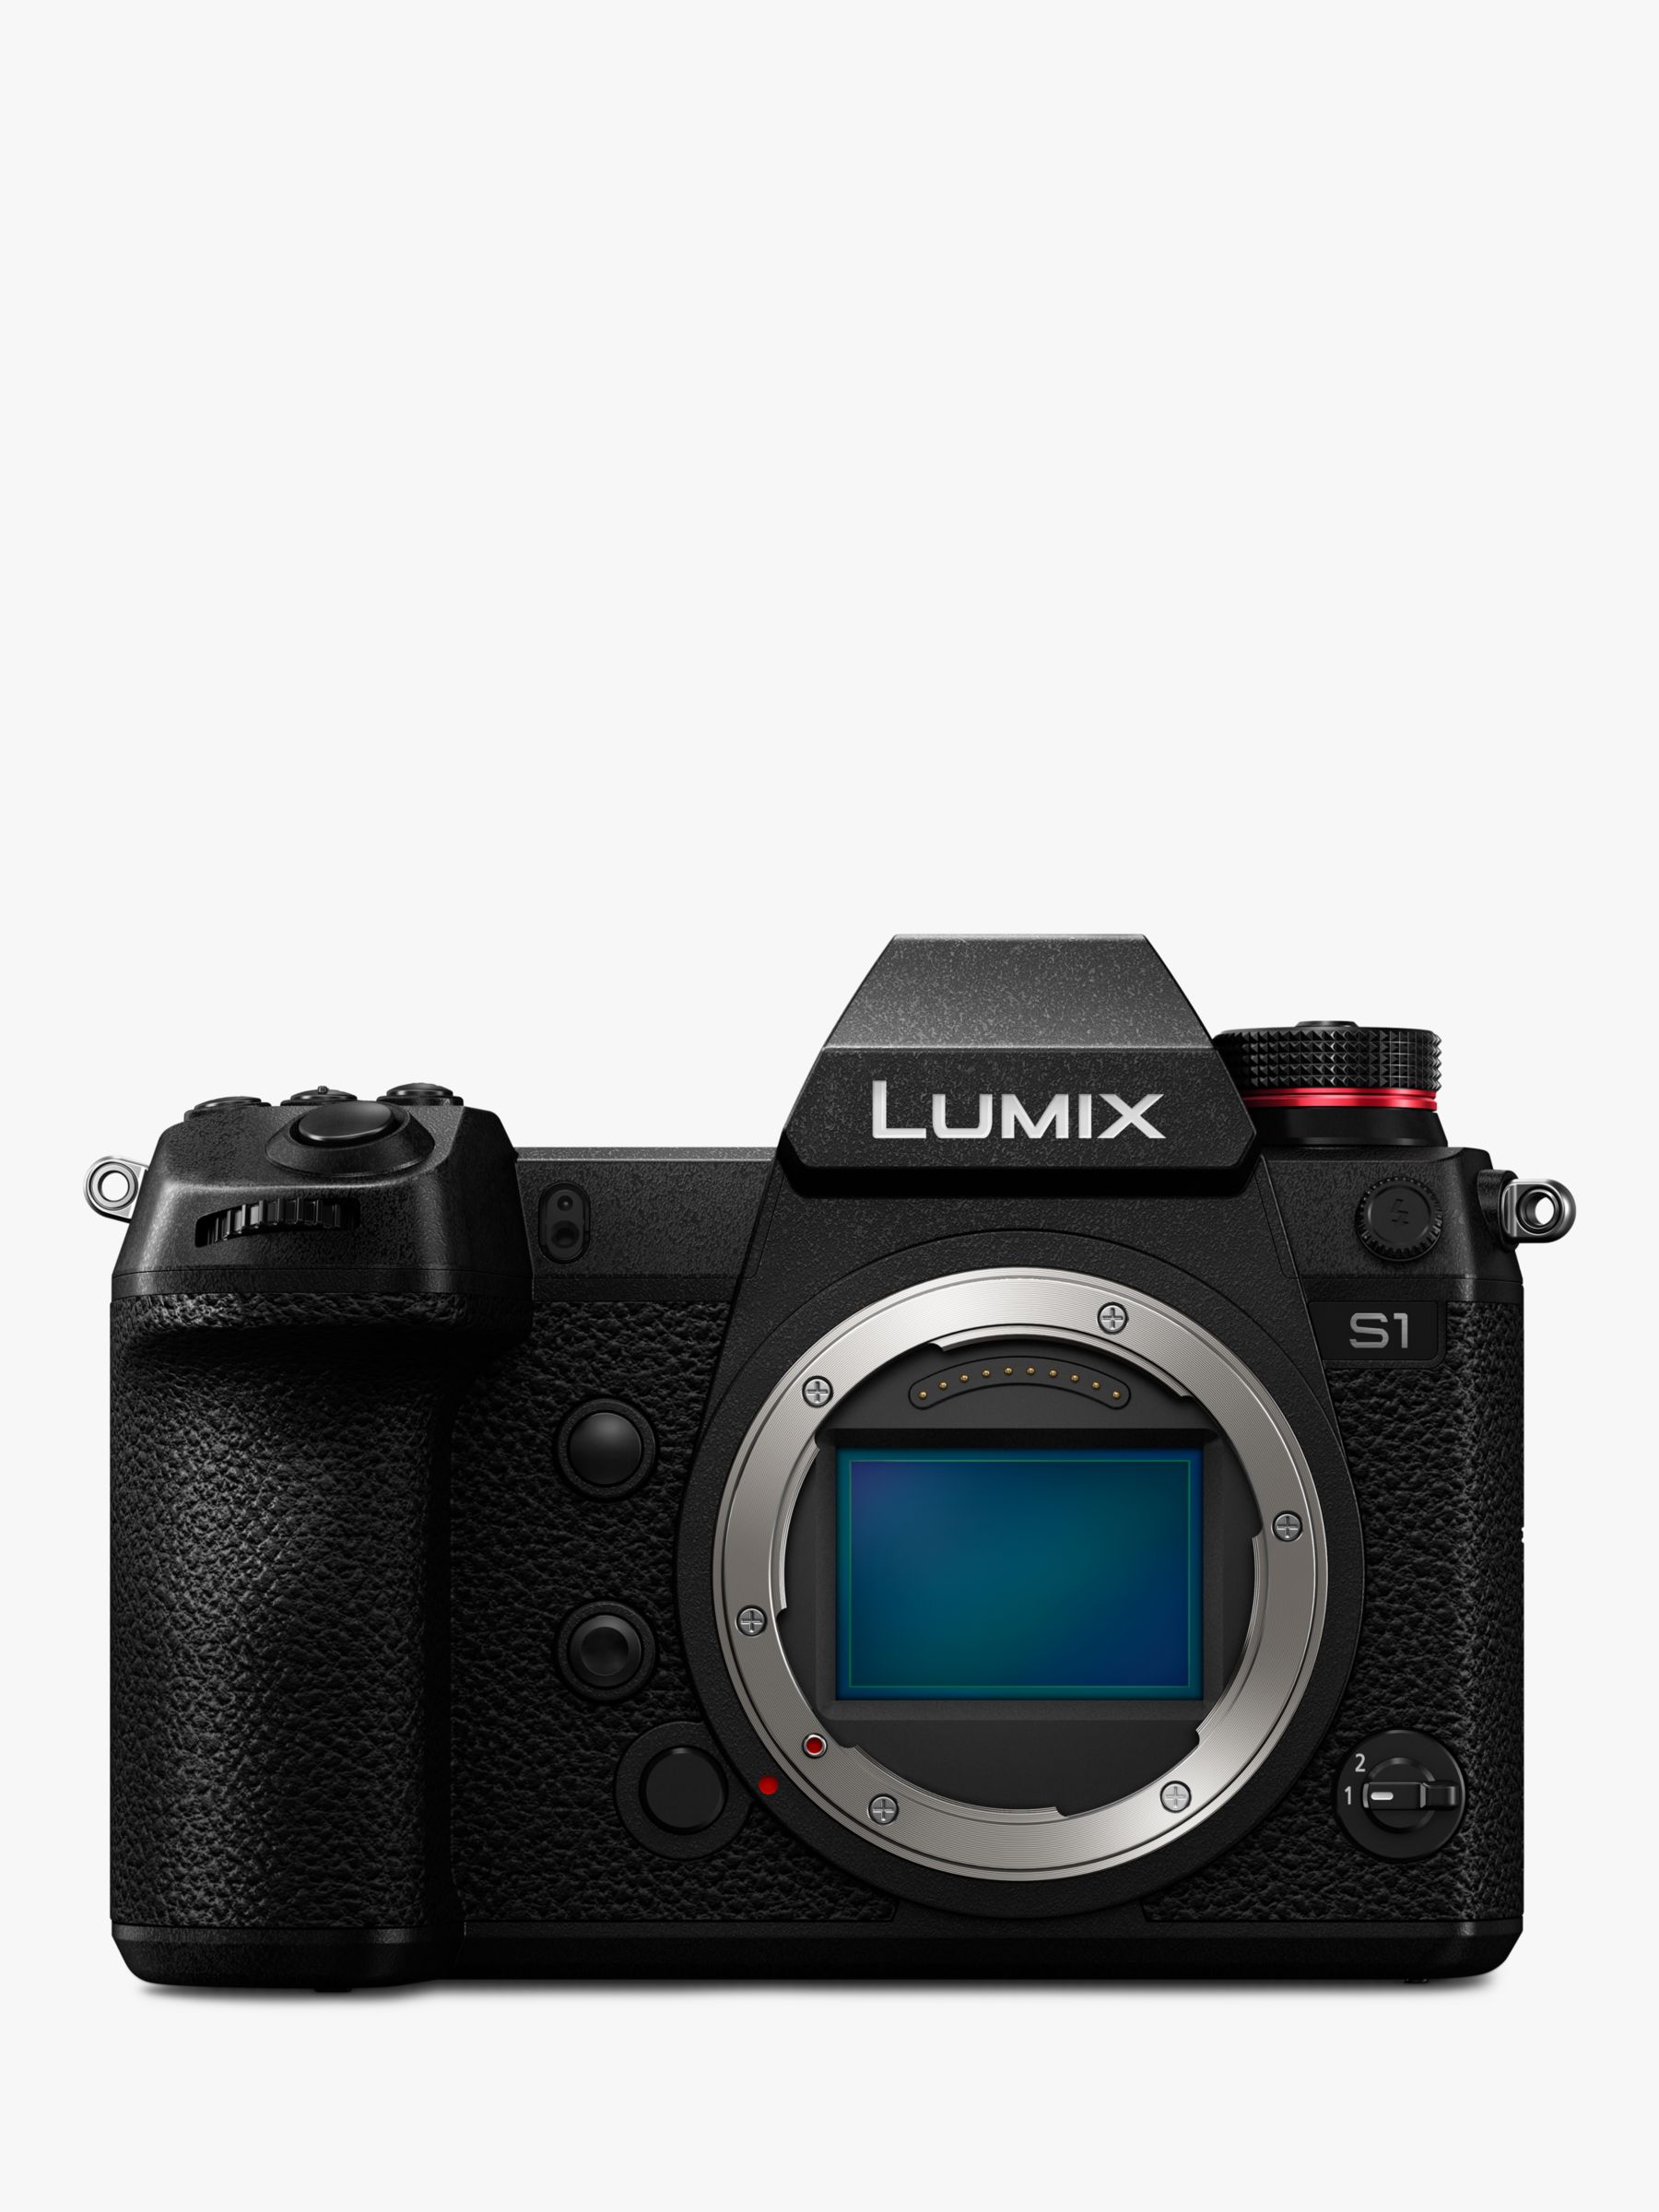 Image of Panasonic Lumix DCS1 Compact System Camera 4K UHD 242MP WiFi Bluetooth OLED EVF 32 Tiltable Touch Screen Body Only Black